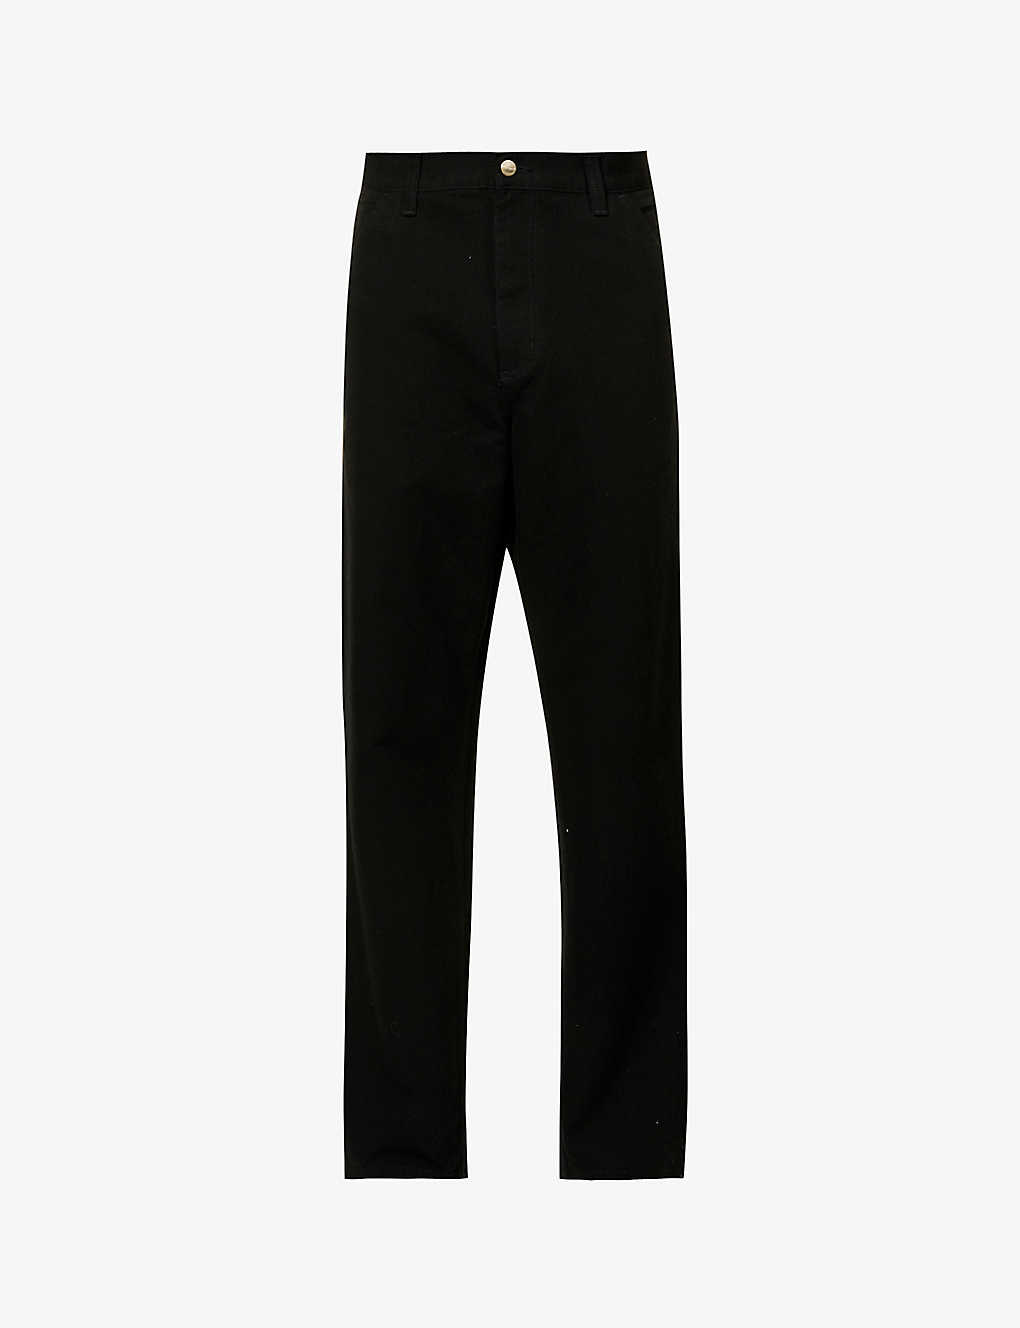 Carhartt Wip Mens Black Single Knee Straight Relaxed-fit Organic-cotton Trousers